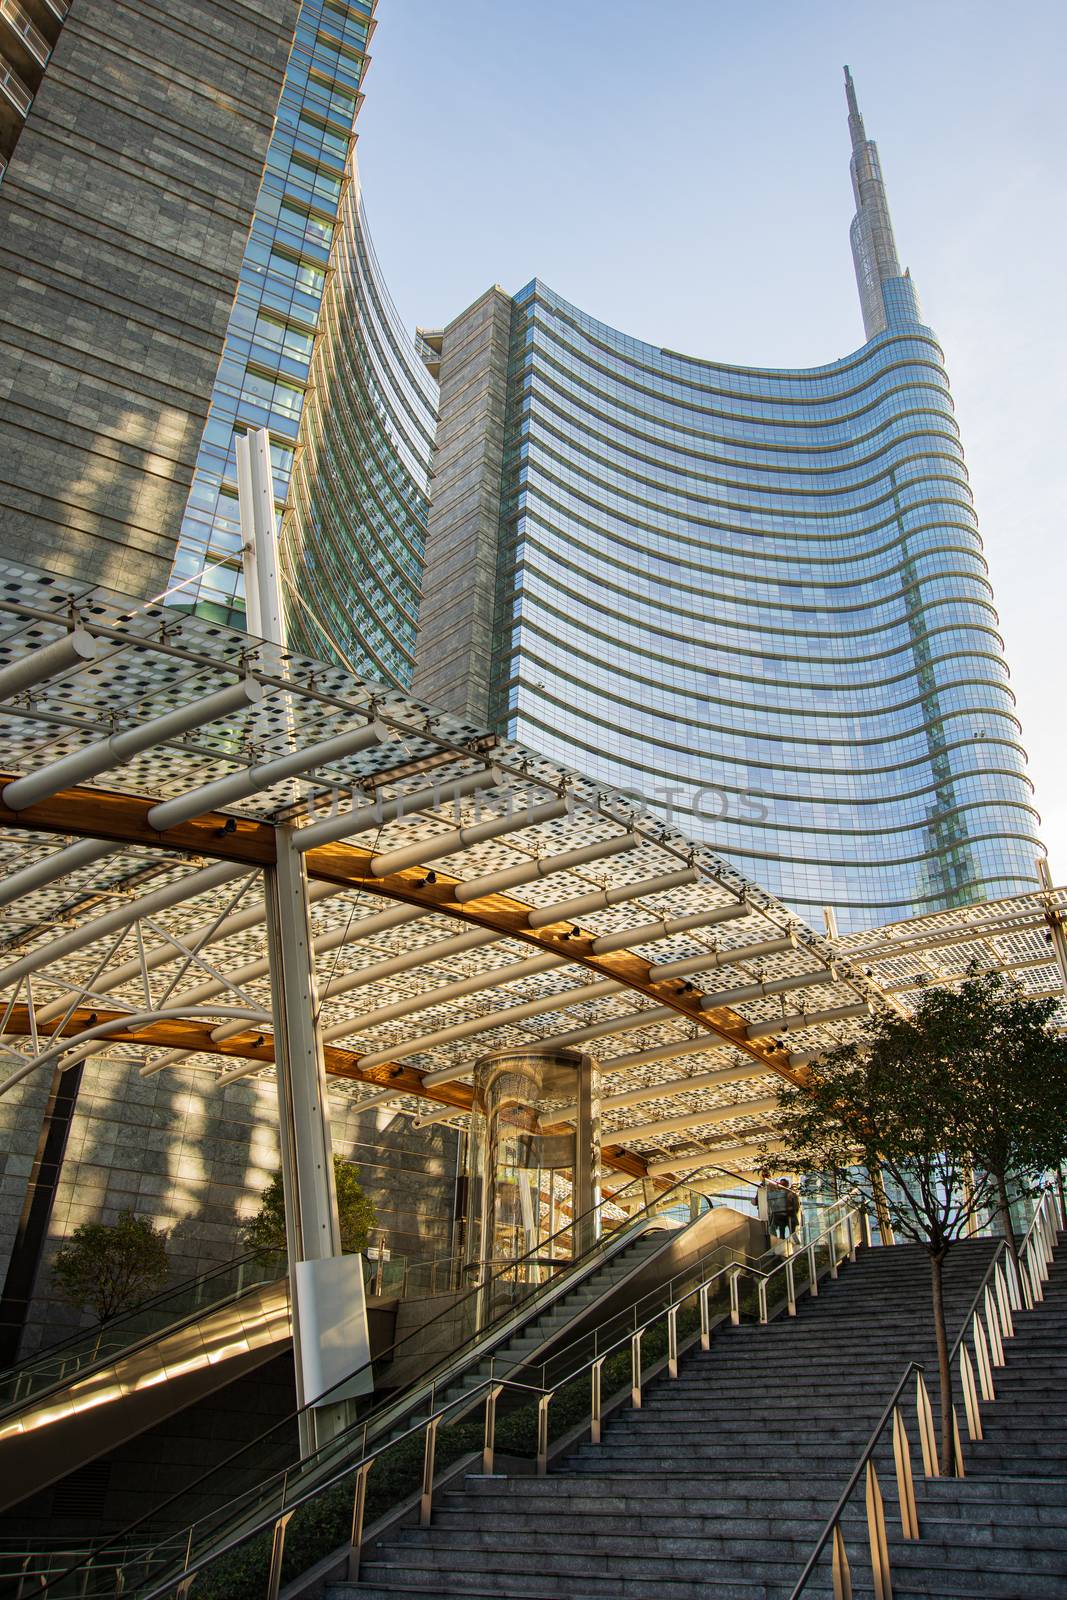 Bottom view of skyscrapers and stairways, image of Italian contemporary architecture